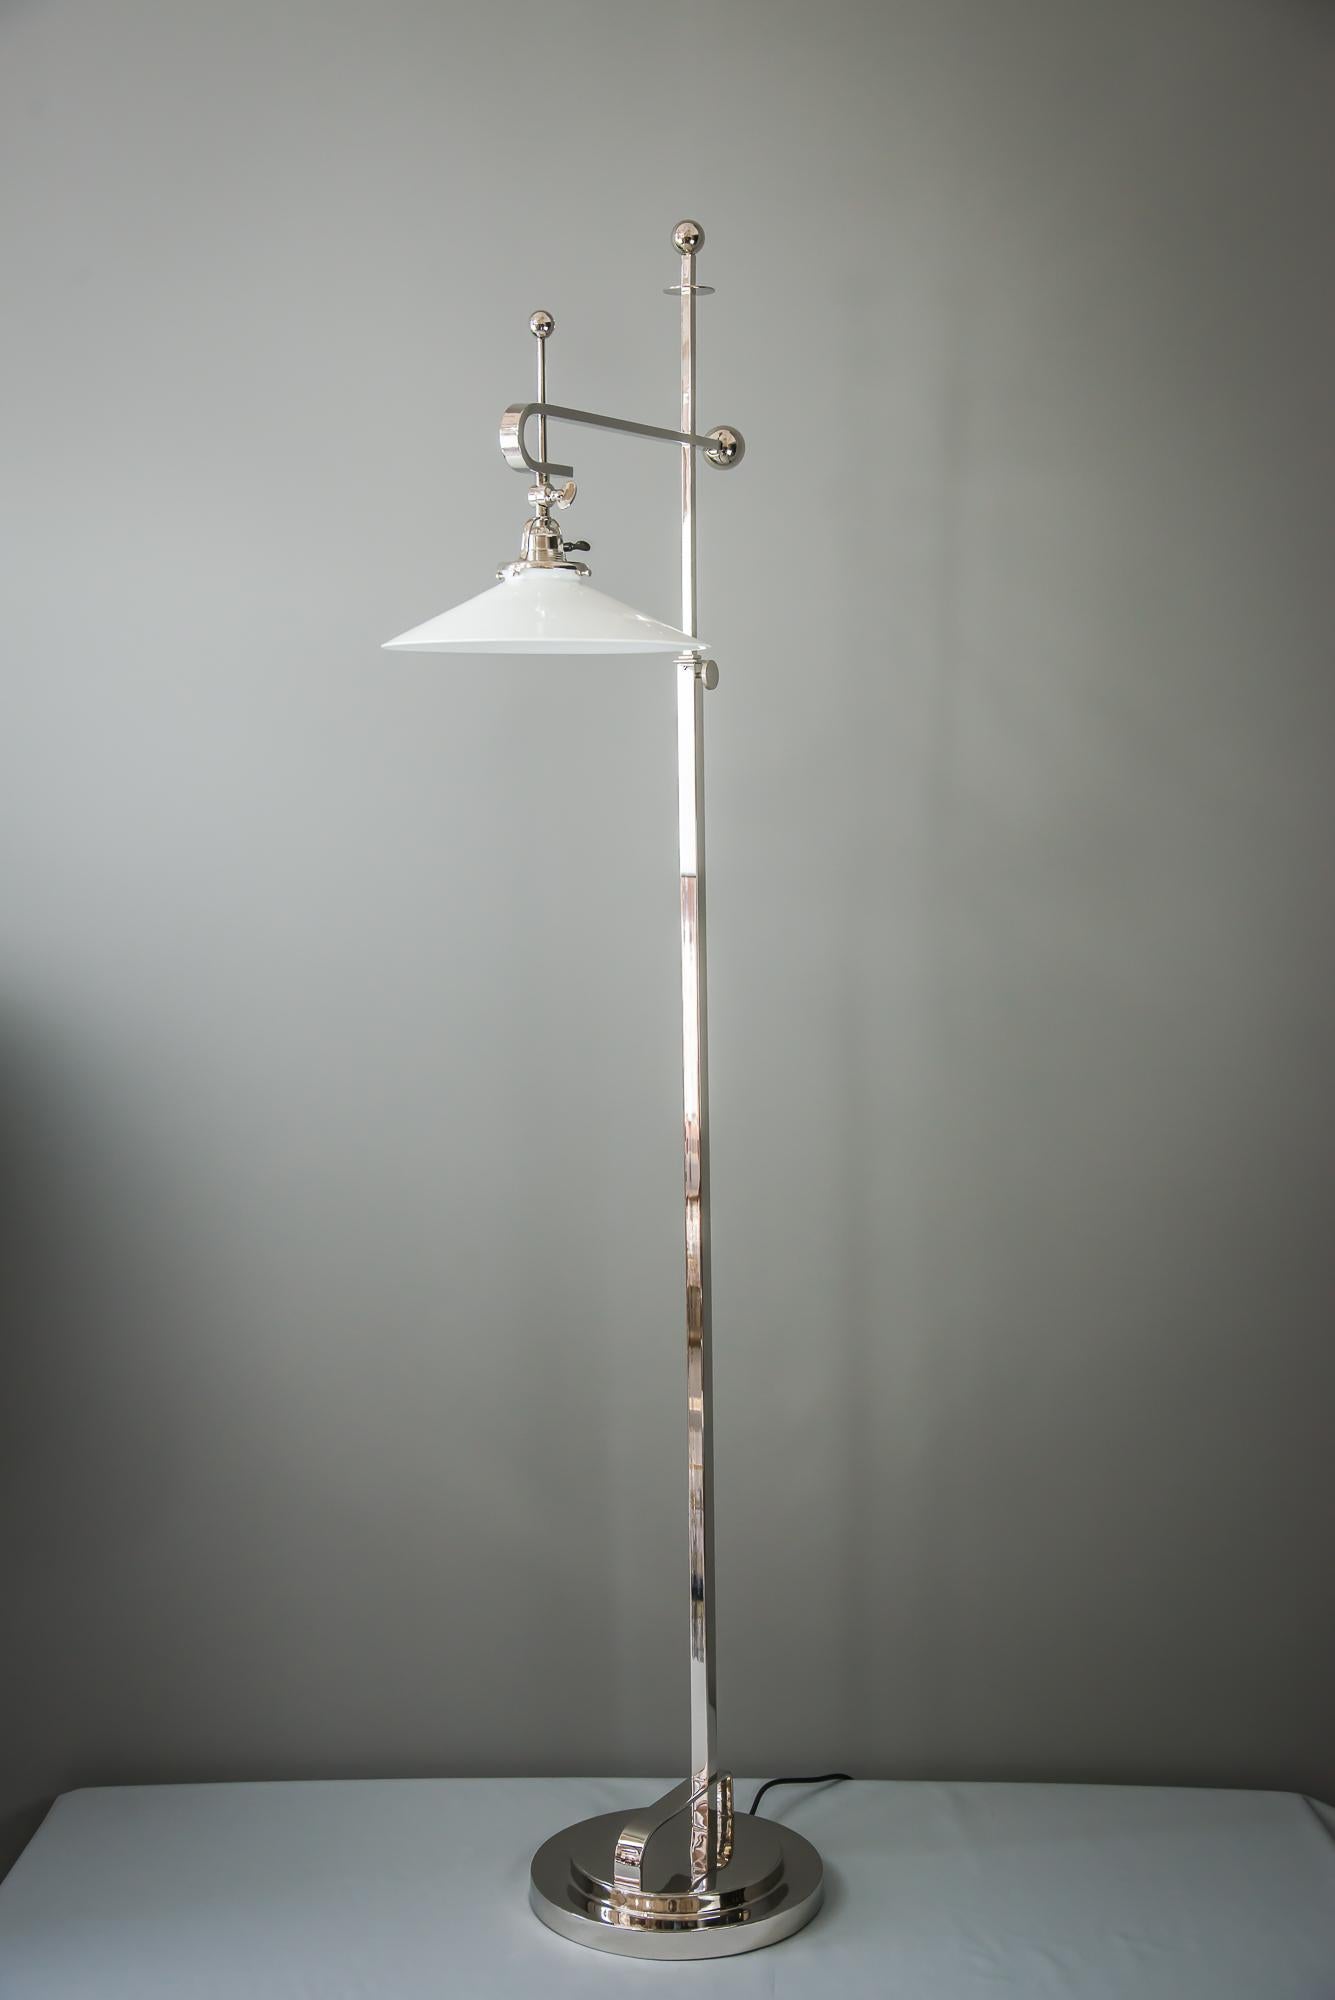 Art Deco floor lamp, circa 1920s.
Nickel-plated
Swivelling
Normal high 168cm - extendable to 200 cm
Original shade.